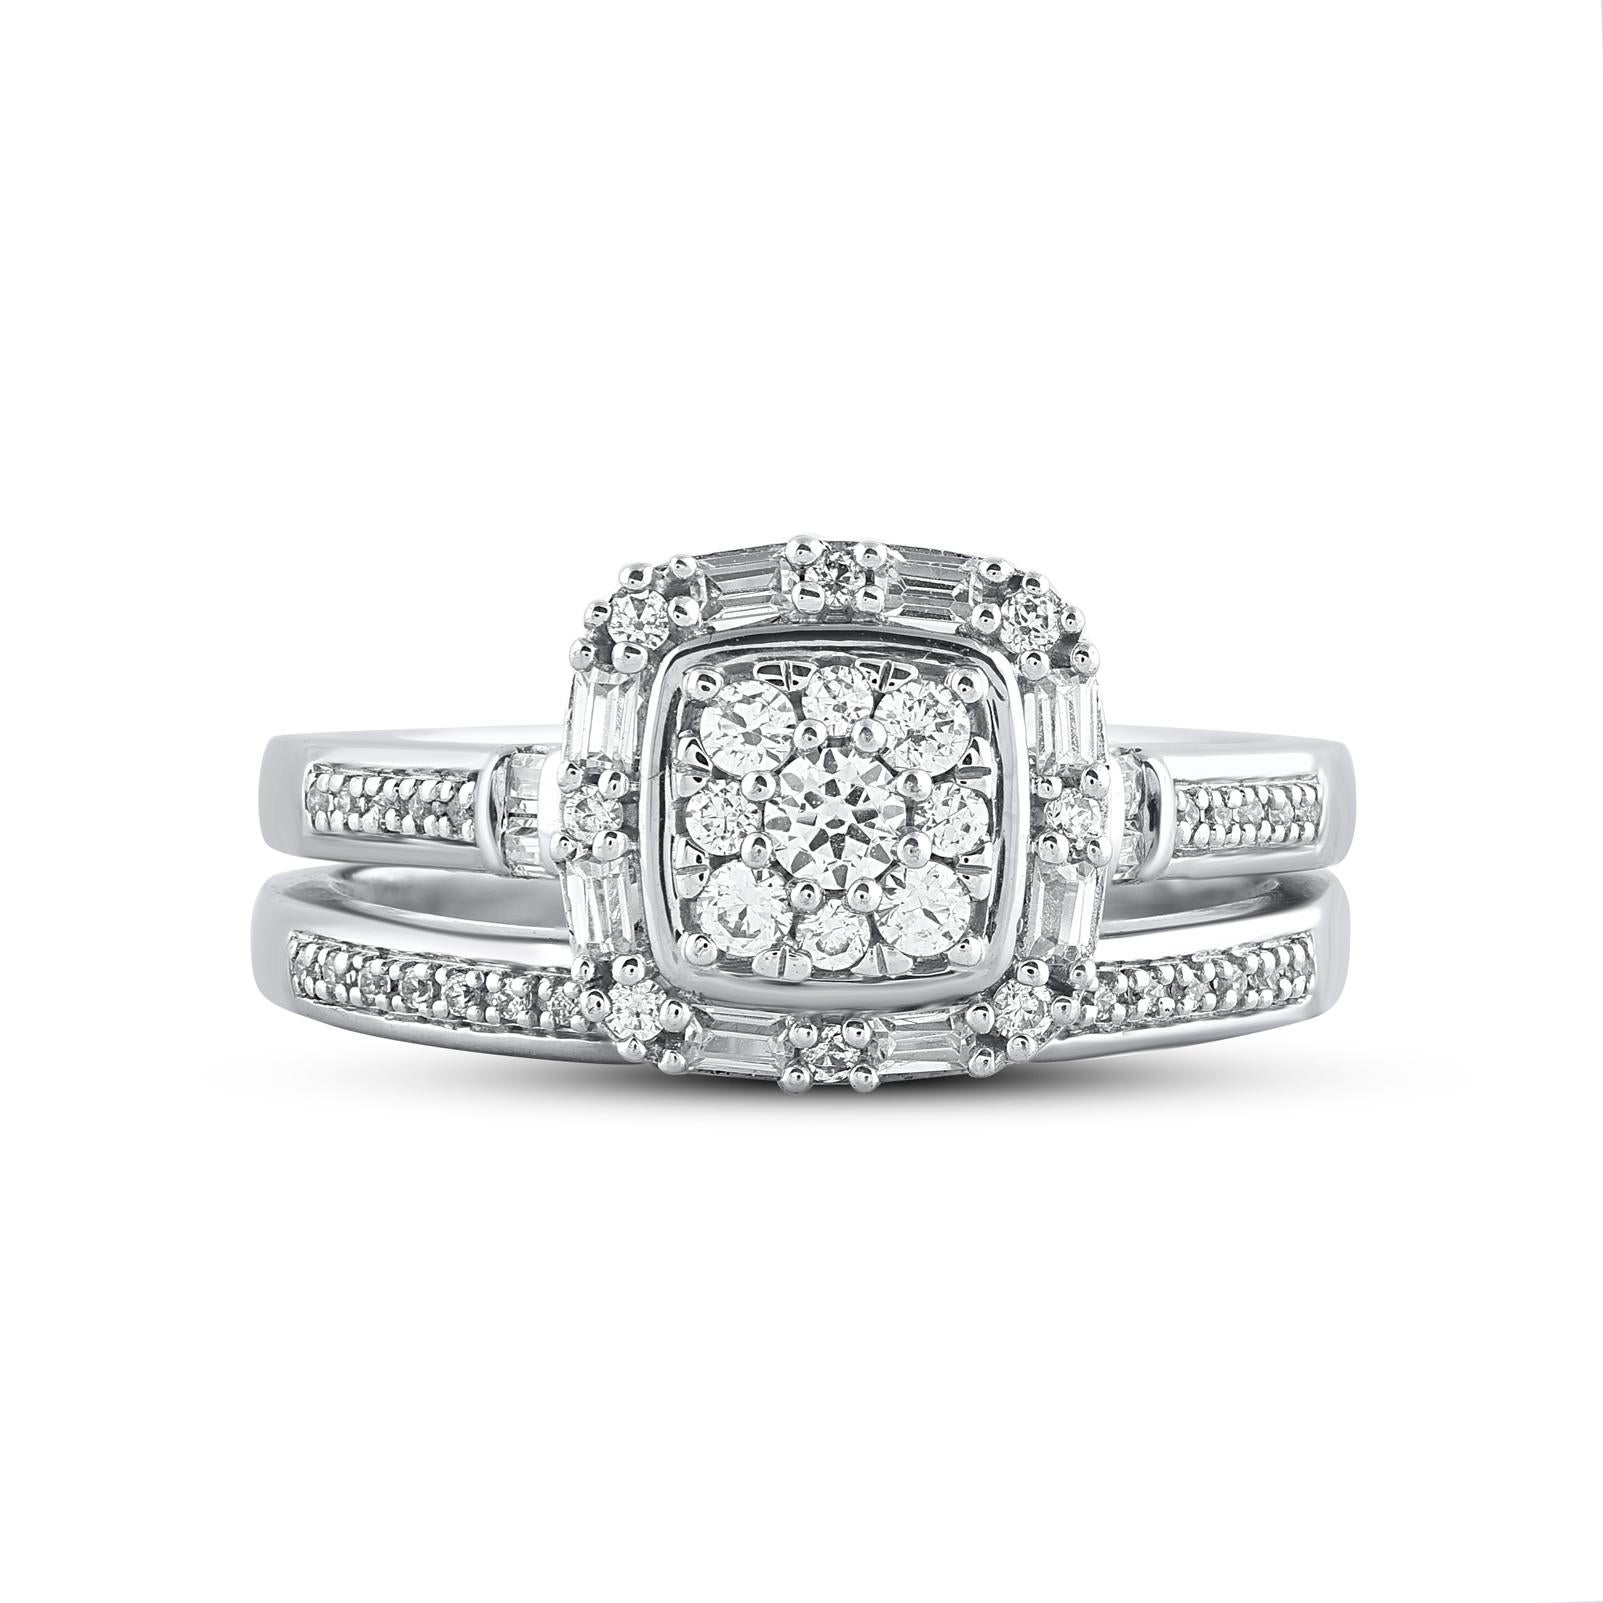 Make every moment sparkle with this lovely diamond bridal set in 14KT gold. Crafted in 14 Karat white gold. This wedding ring features a sparkling 60 brilliant cut, single cut round diamond & baguette cut diamond beautifully set in prong & channel